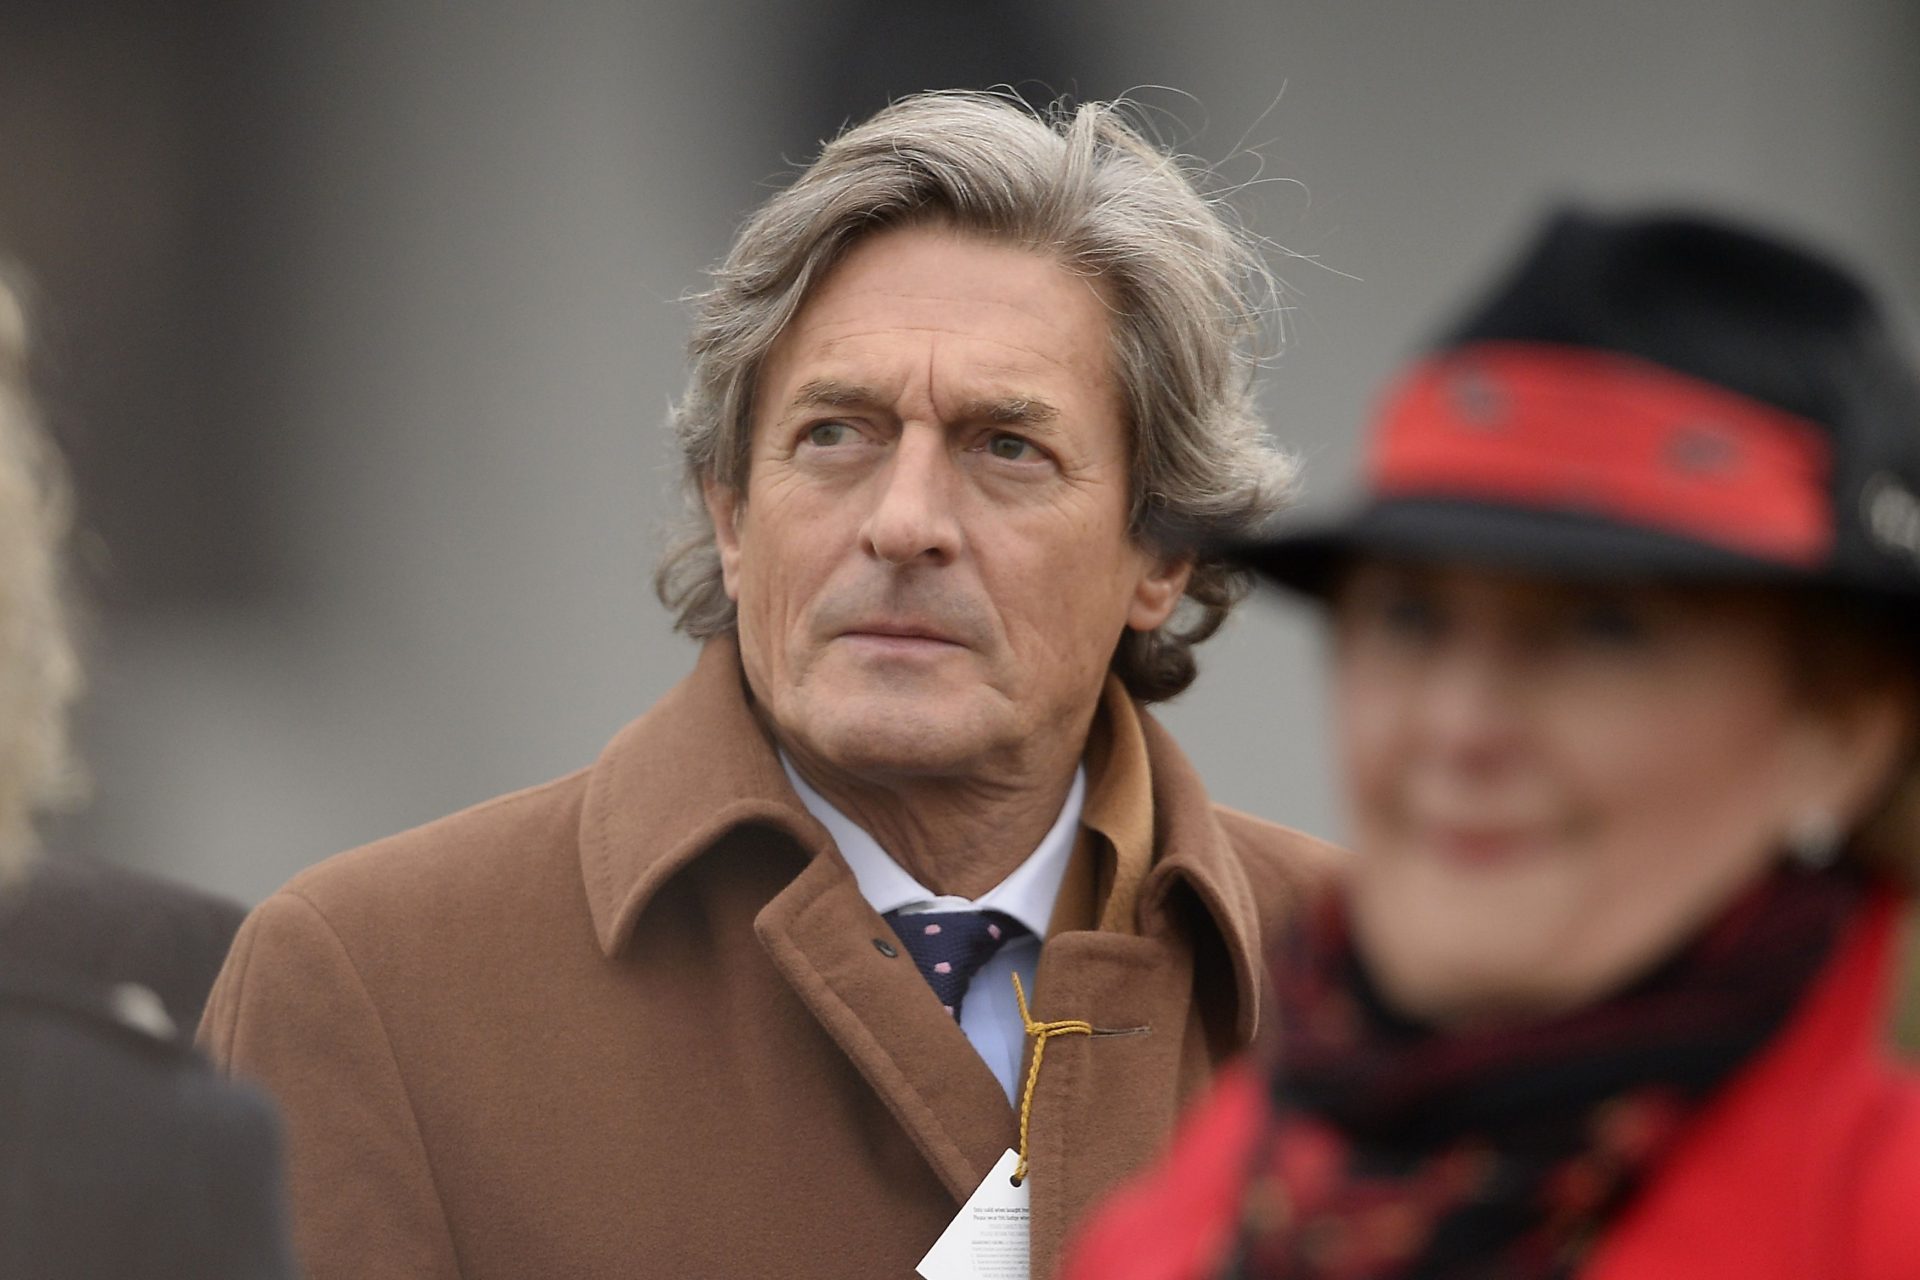 One of the "famous Nigels", actor Nigel Havers. Photo: Joe Giddens/PA Archive/PA Images